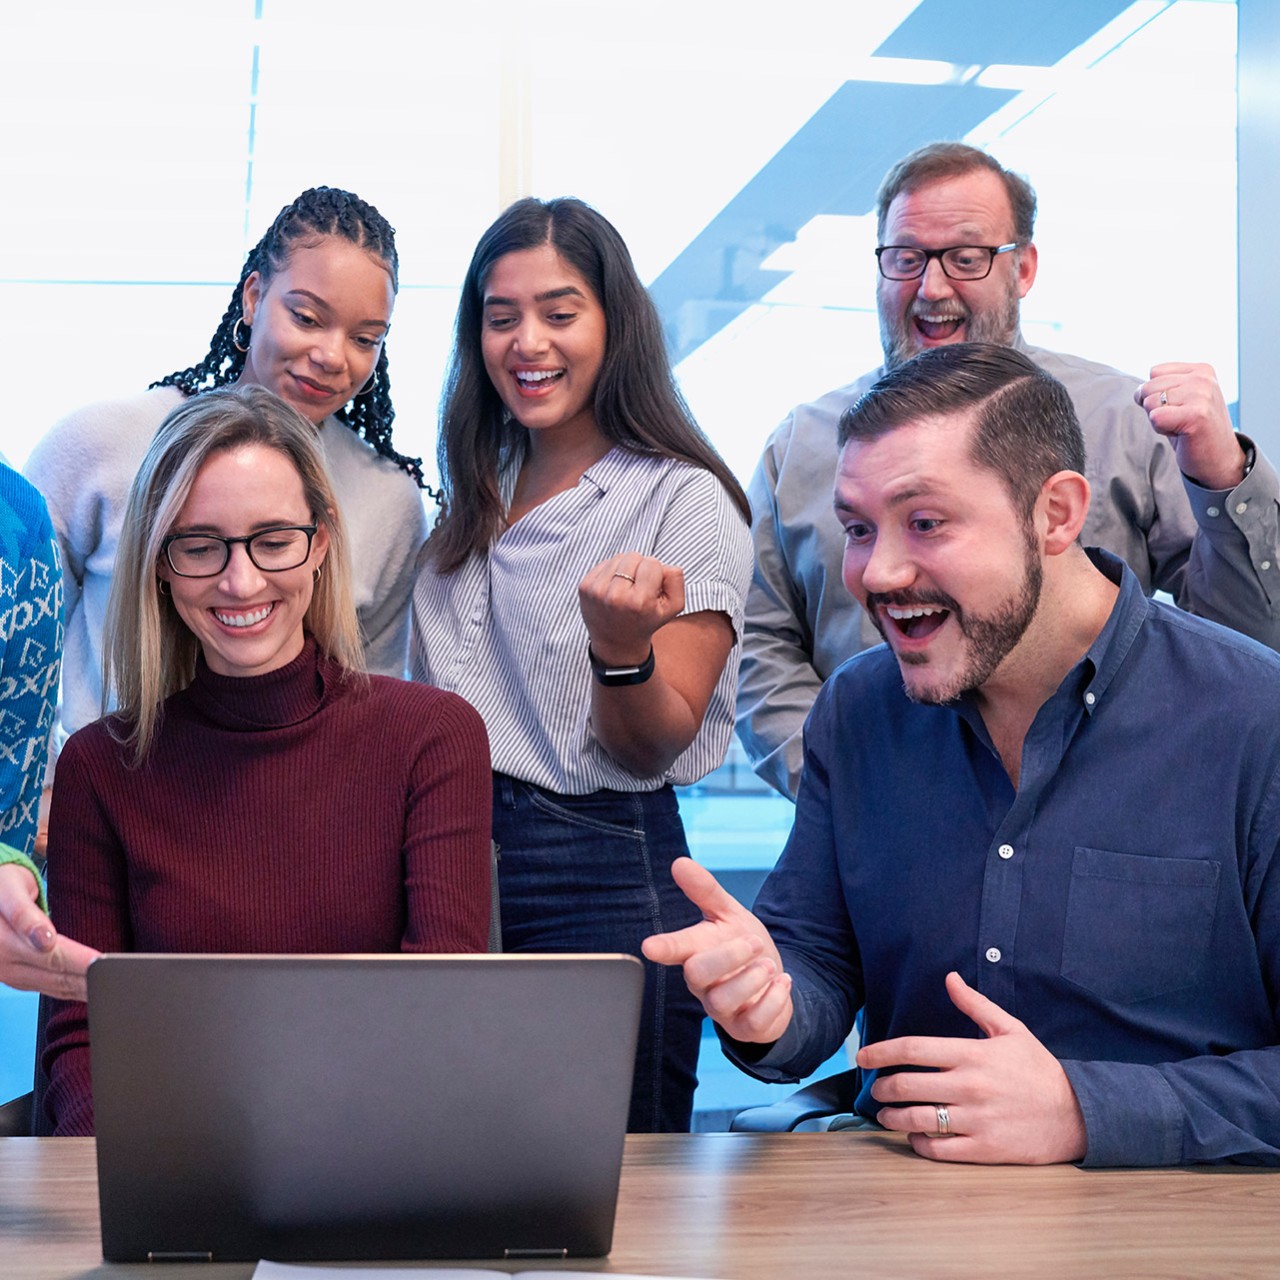 Five persons looking happy and excited in front of a laptop